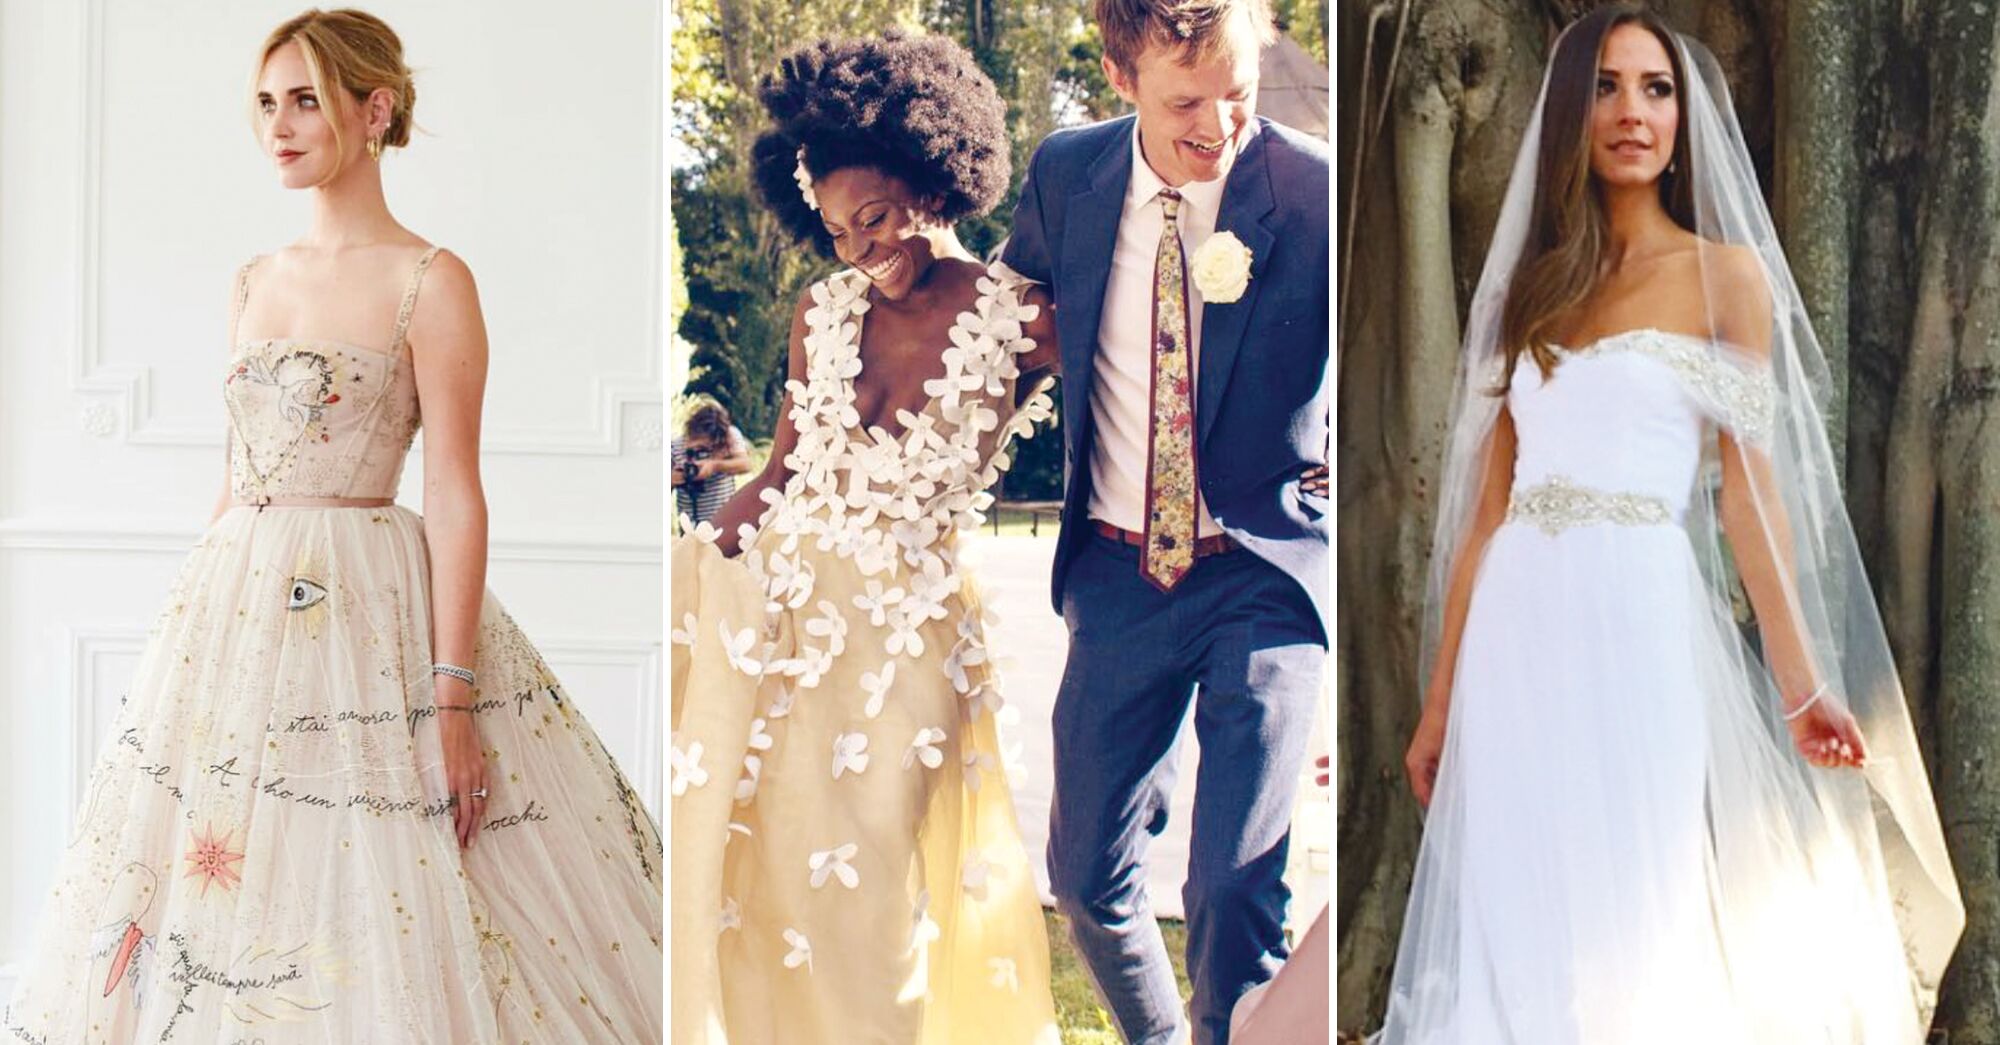 The Wedding Dresses of 11 Famous Fashion Bloggers, Influencers